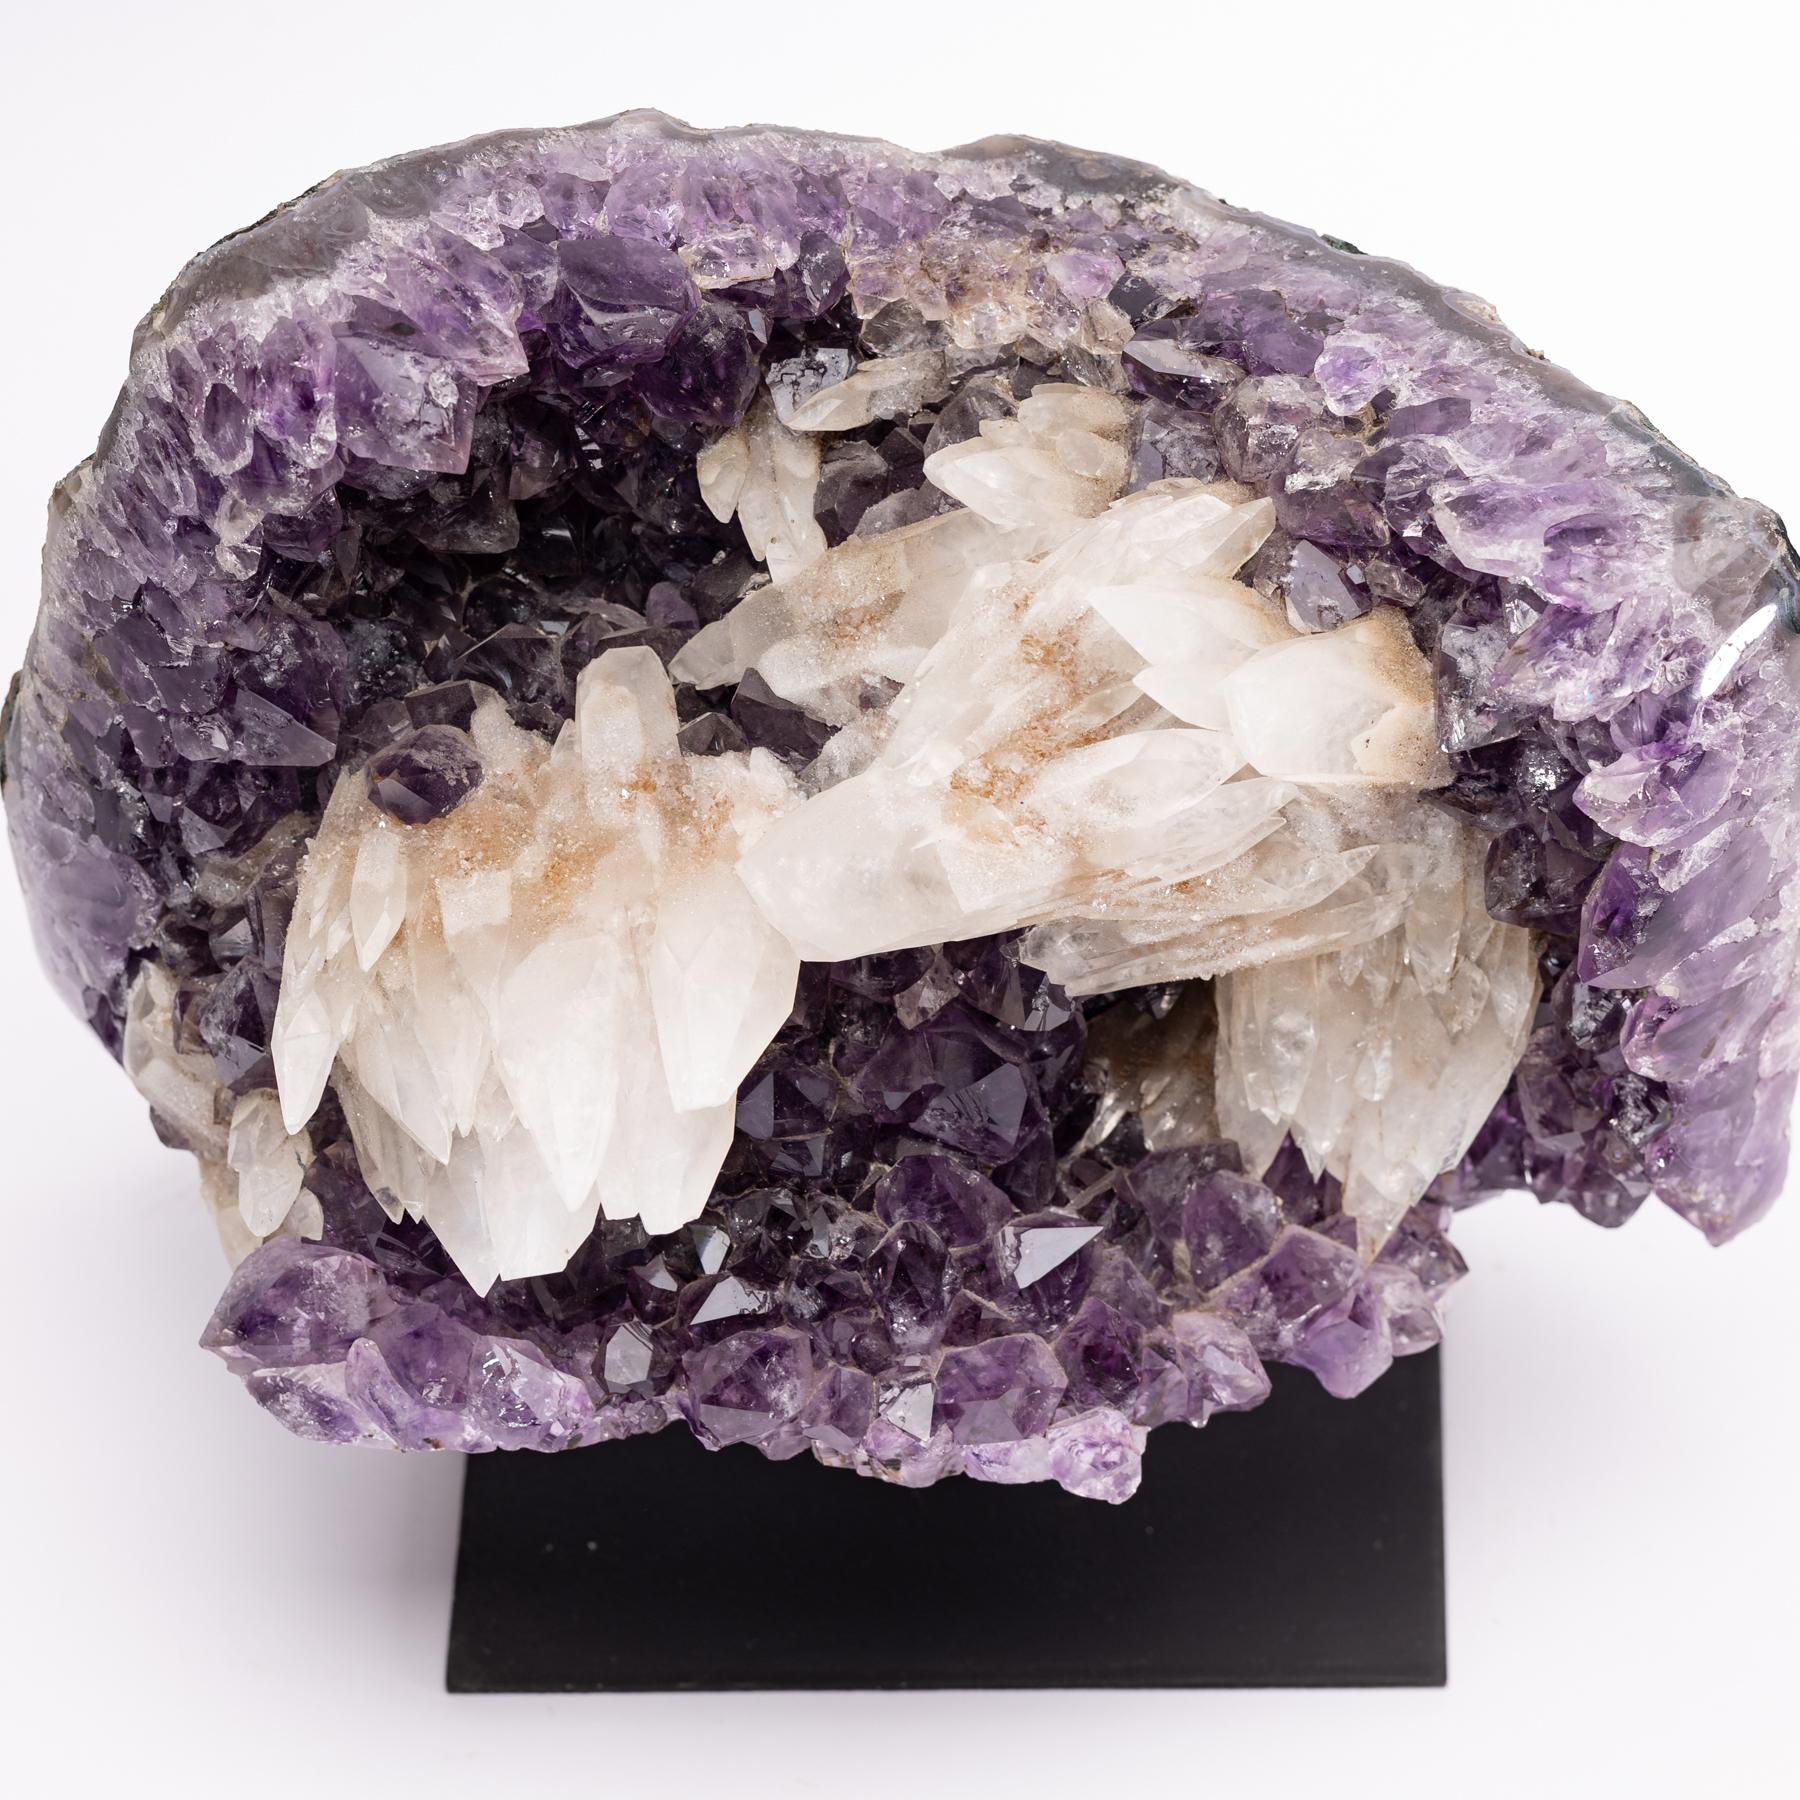 Contemporary Amethyst Druse and Calcite Specimen Mounted on a Custom Metal Stand